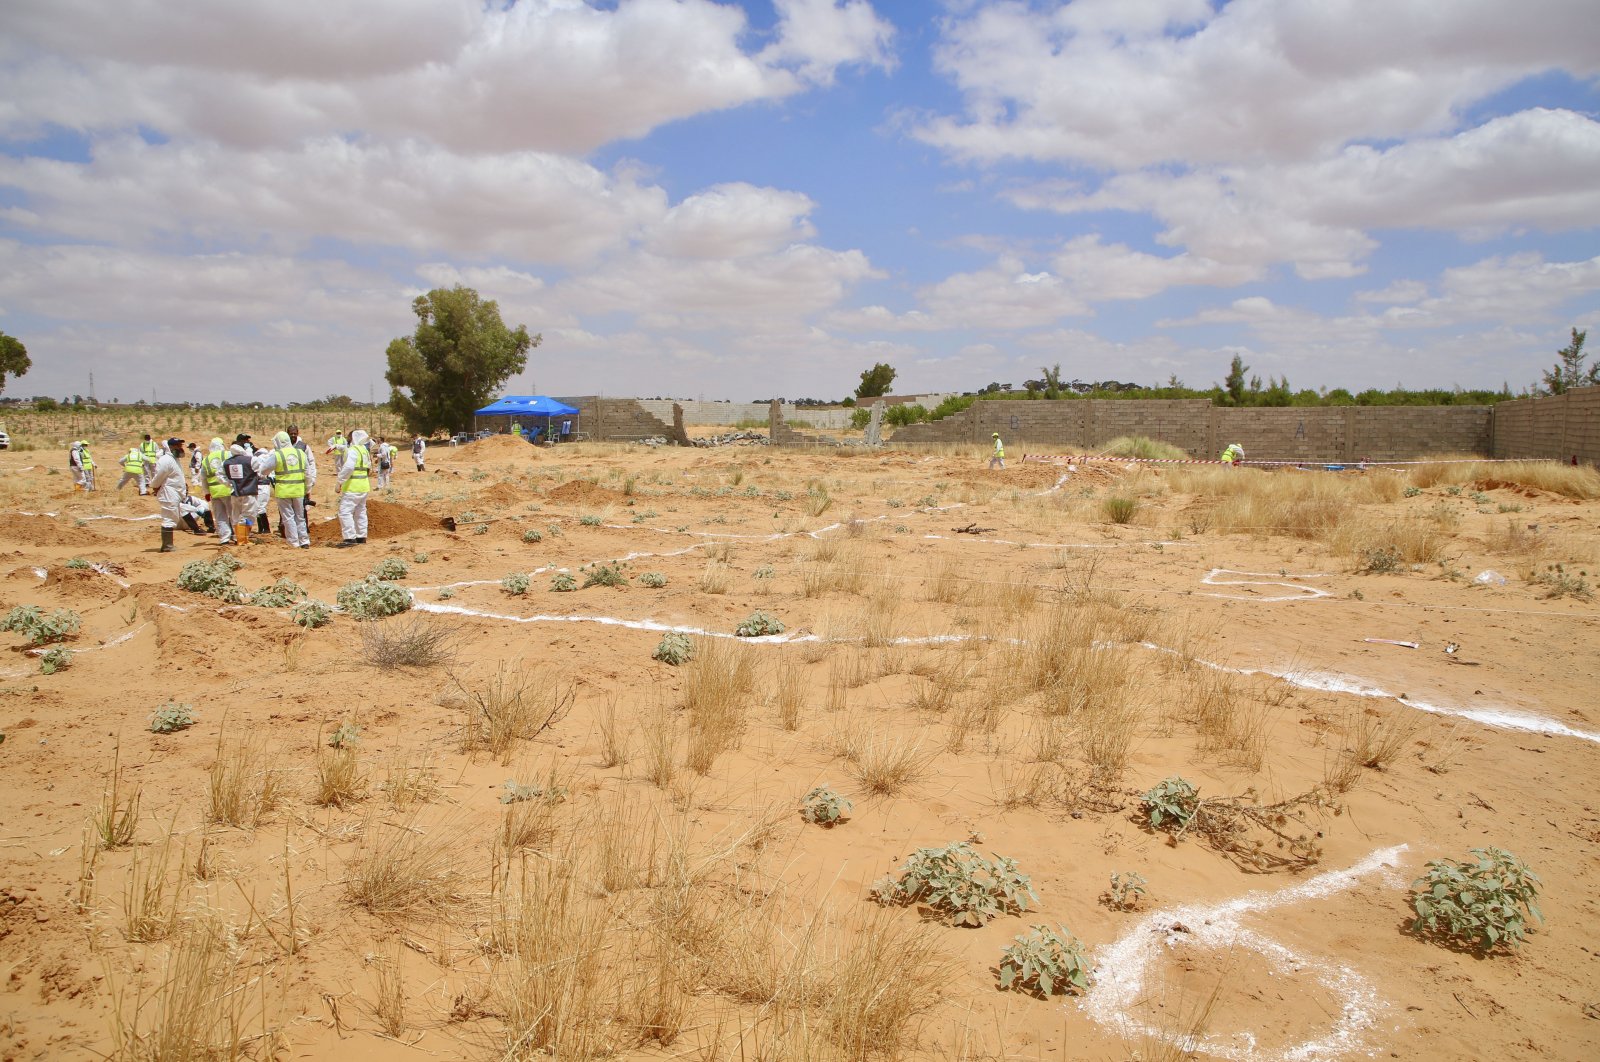 Libyan Ministry of Justice employees dig at the site of a suspected mass grave in the town of Tarhuna, Libya, June 23, 2020. (AP File Photo)